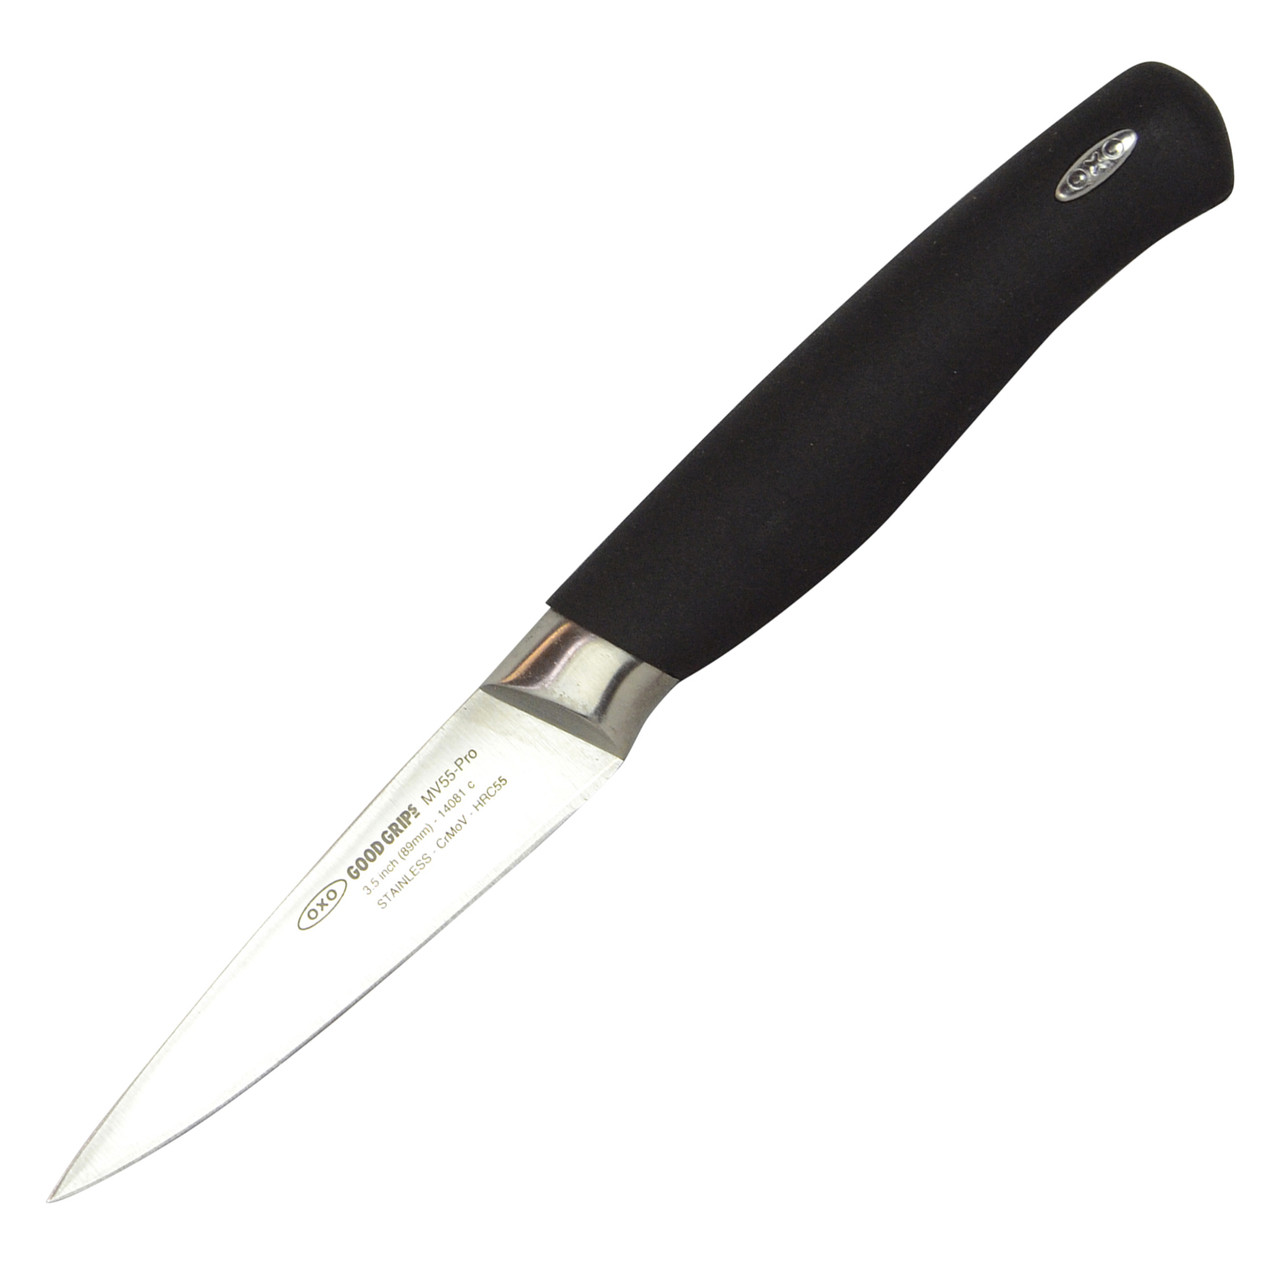 Oxo Soft Works Paring Knife, Household